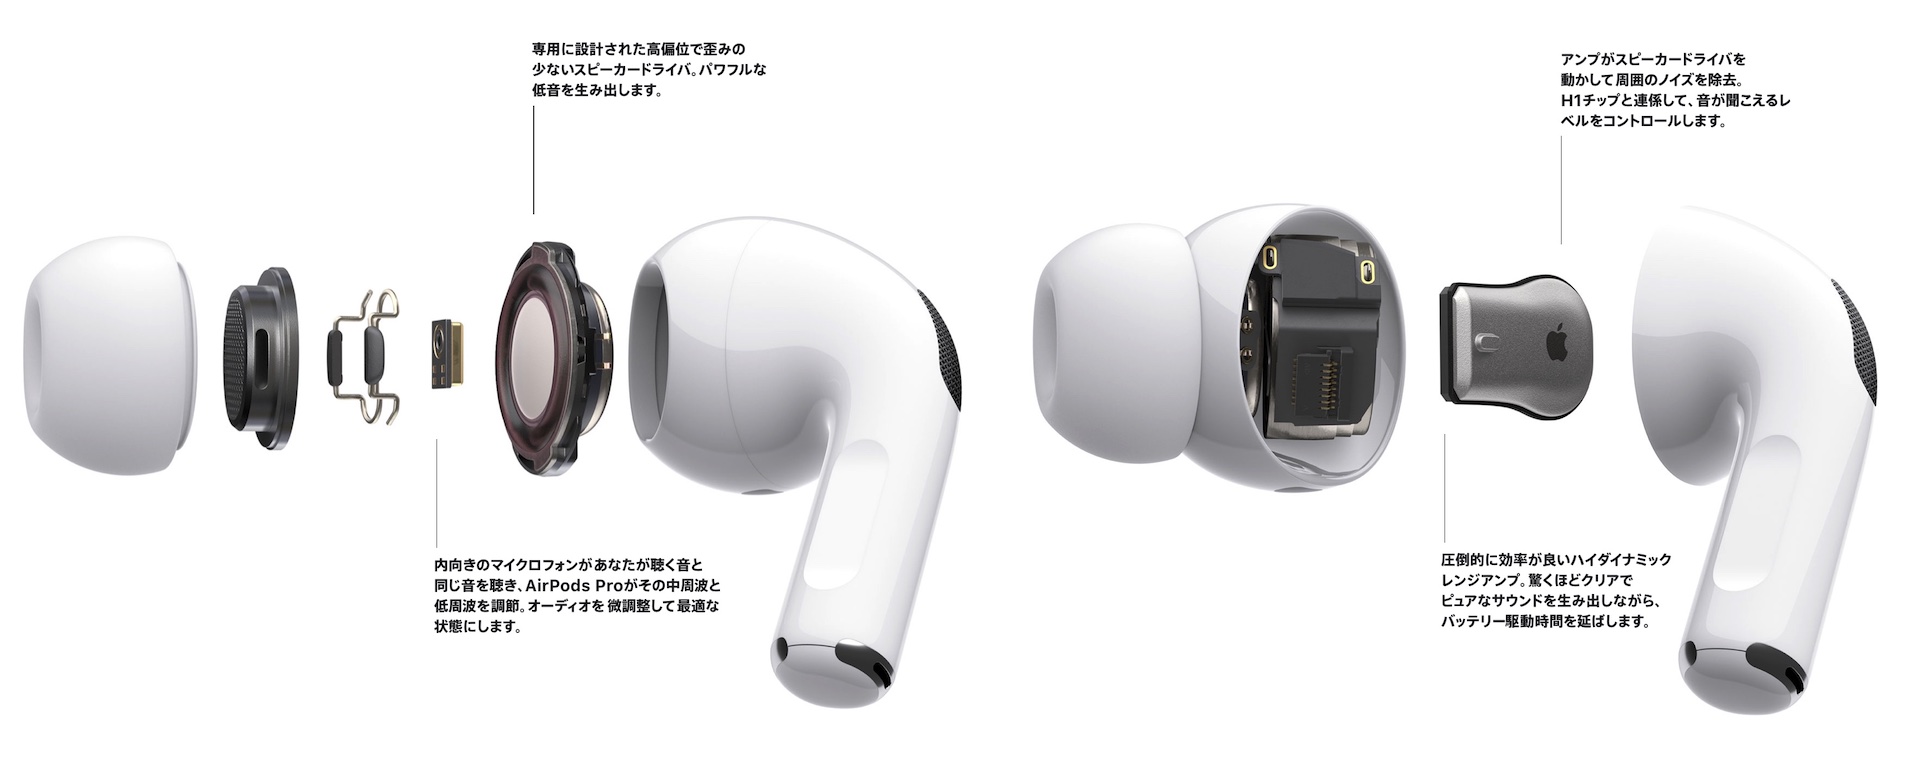 AirPods ProのSiPとスピーカー